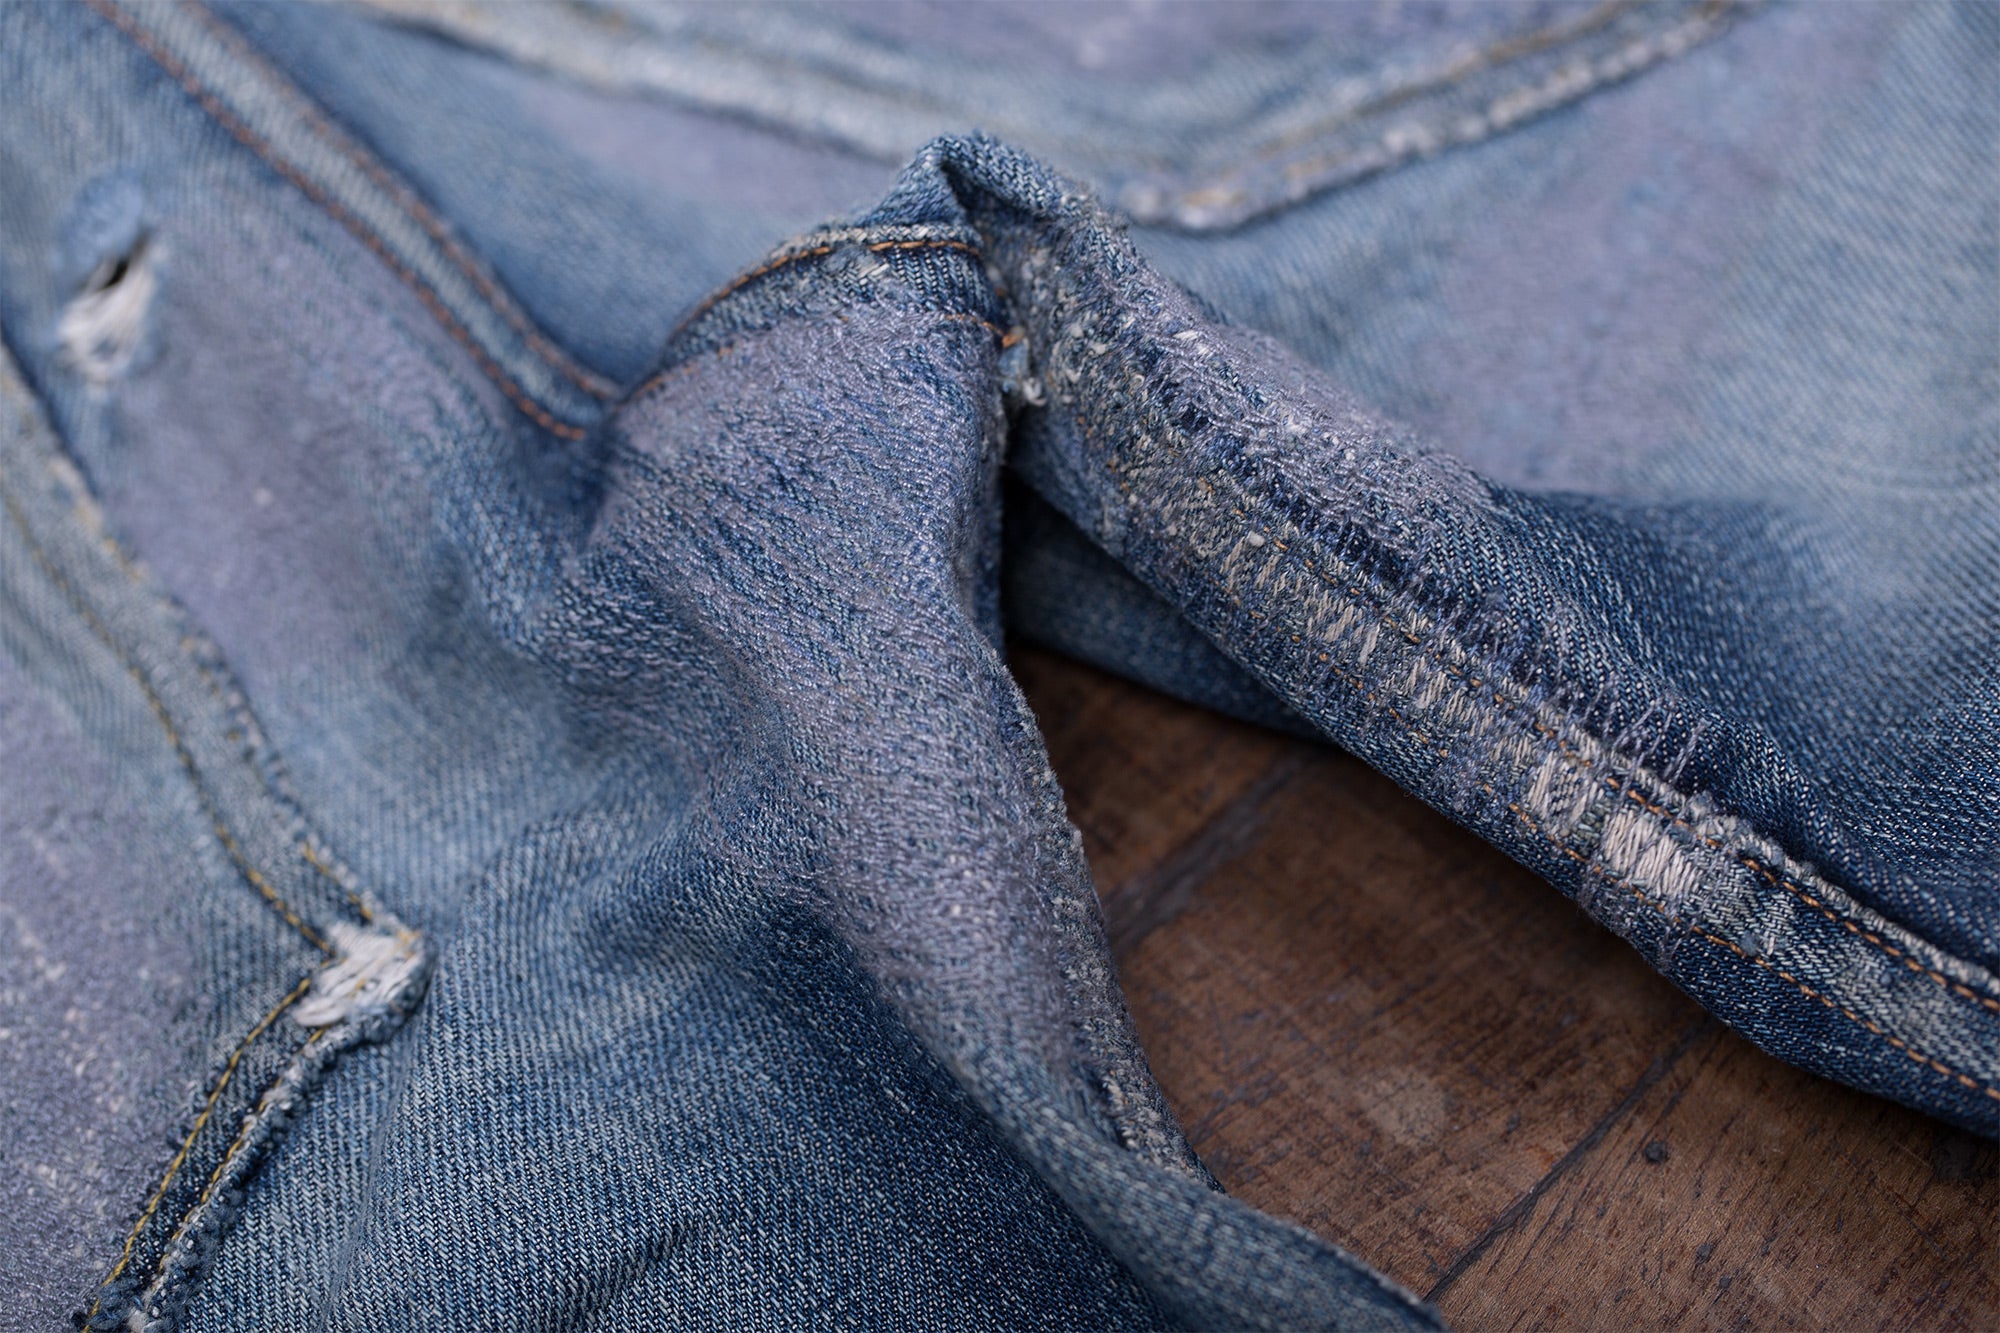 Closeup of repaired areas of the jeans where the denim has taken on a purple-ish hue.